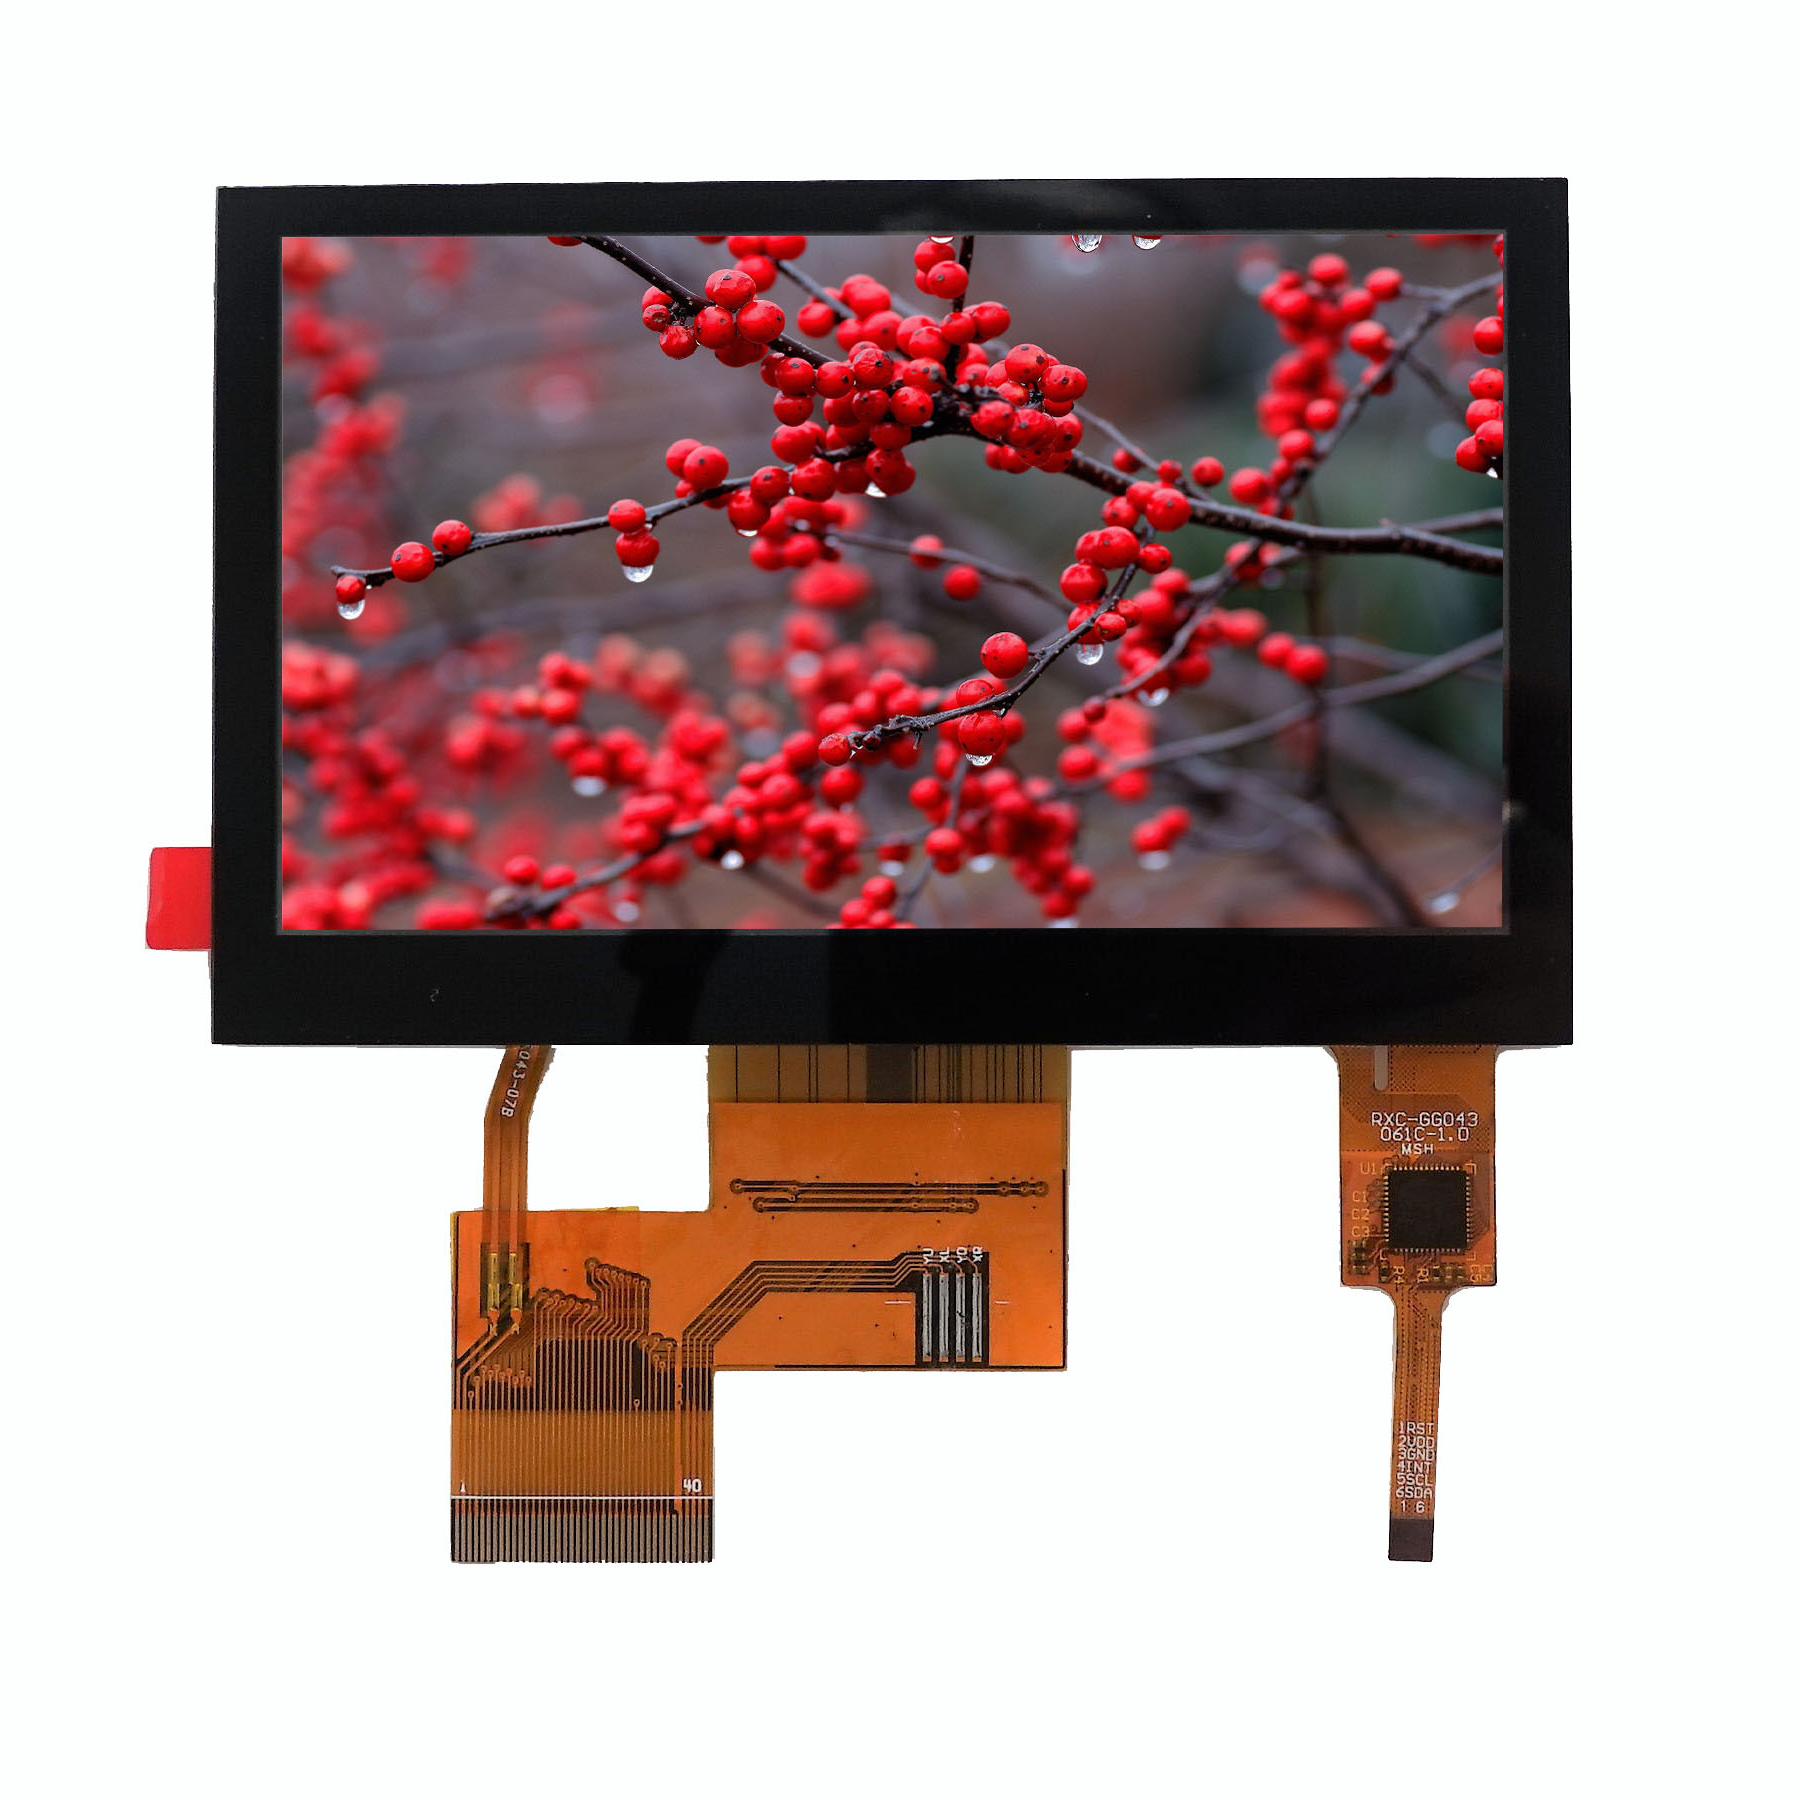 LCD display screen main interface and product description